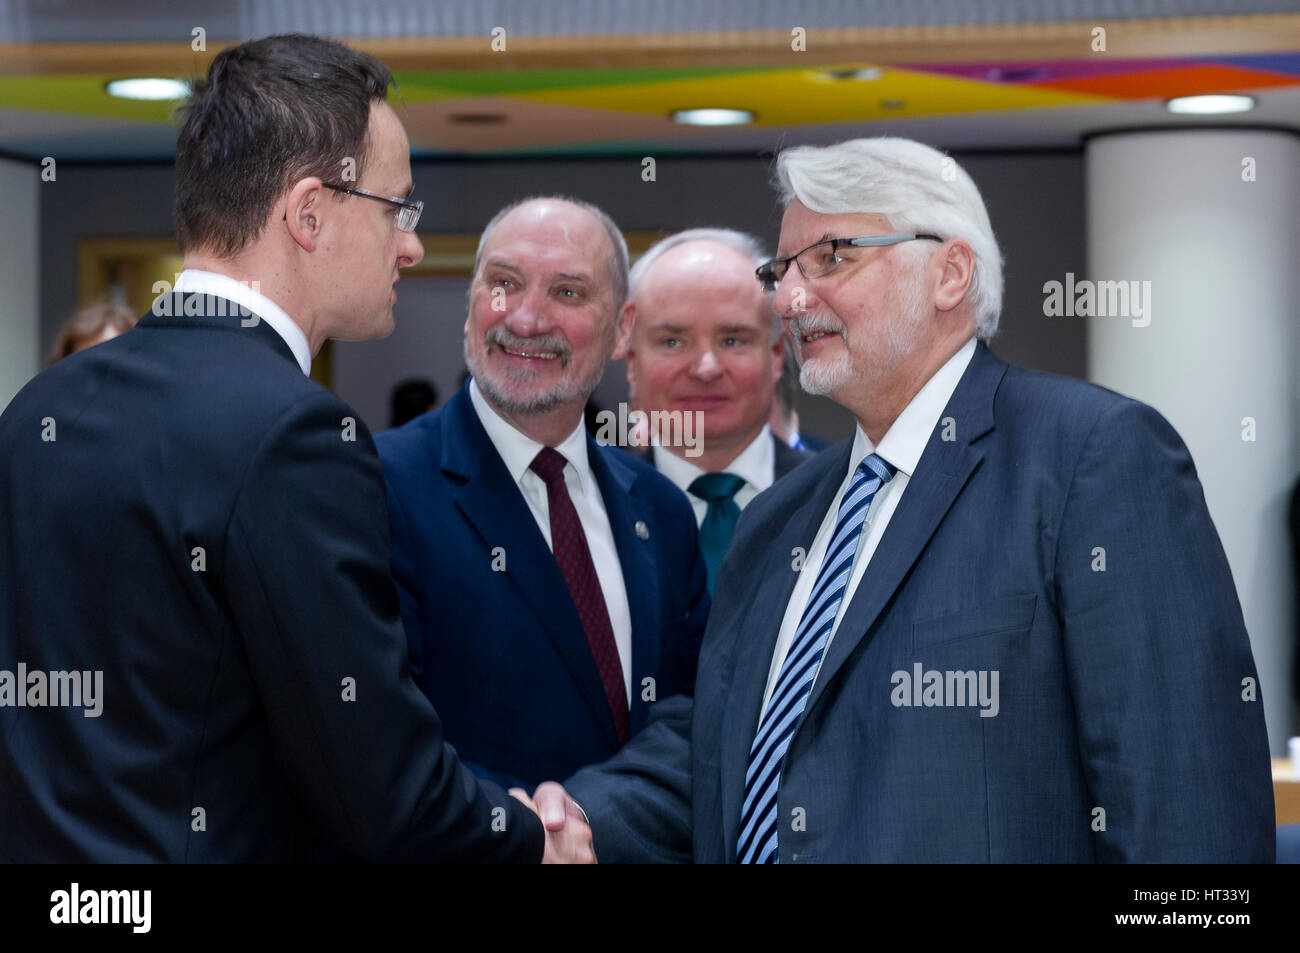 March 6, 2017 - Brussels, Belgium: Hungarian Minister of Foreign Affairs & External Economy Peter Szijjarto (L) is talking with the Polish Minister of National Defense Antoni Macierewicz (C) and the Polish Minister of Foreign Affairs Witold Waszczykowski (R) during an EU Defense and foreign affairs Ministers meeting in the Europa building, the EU Council headquarter. - NO WIRE SERVICE- Photo: Thierry Monasse/dpa Photo: Thierry Monasse/dpa Stock Photo